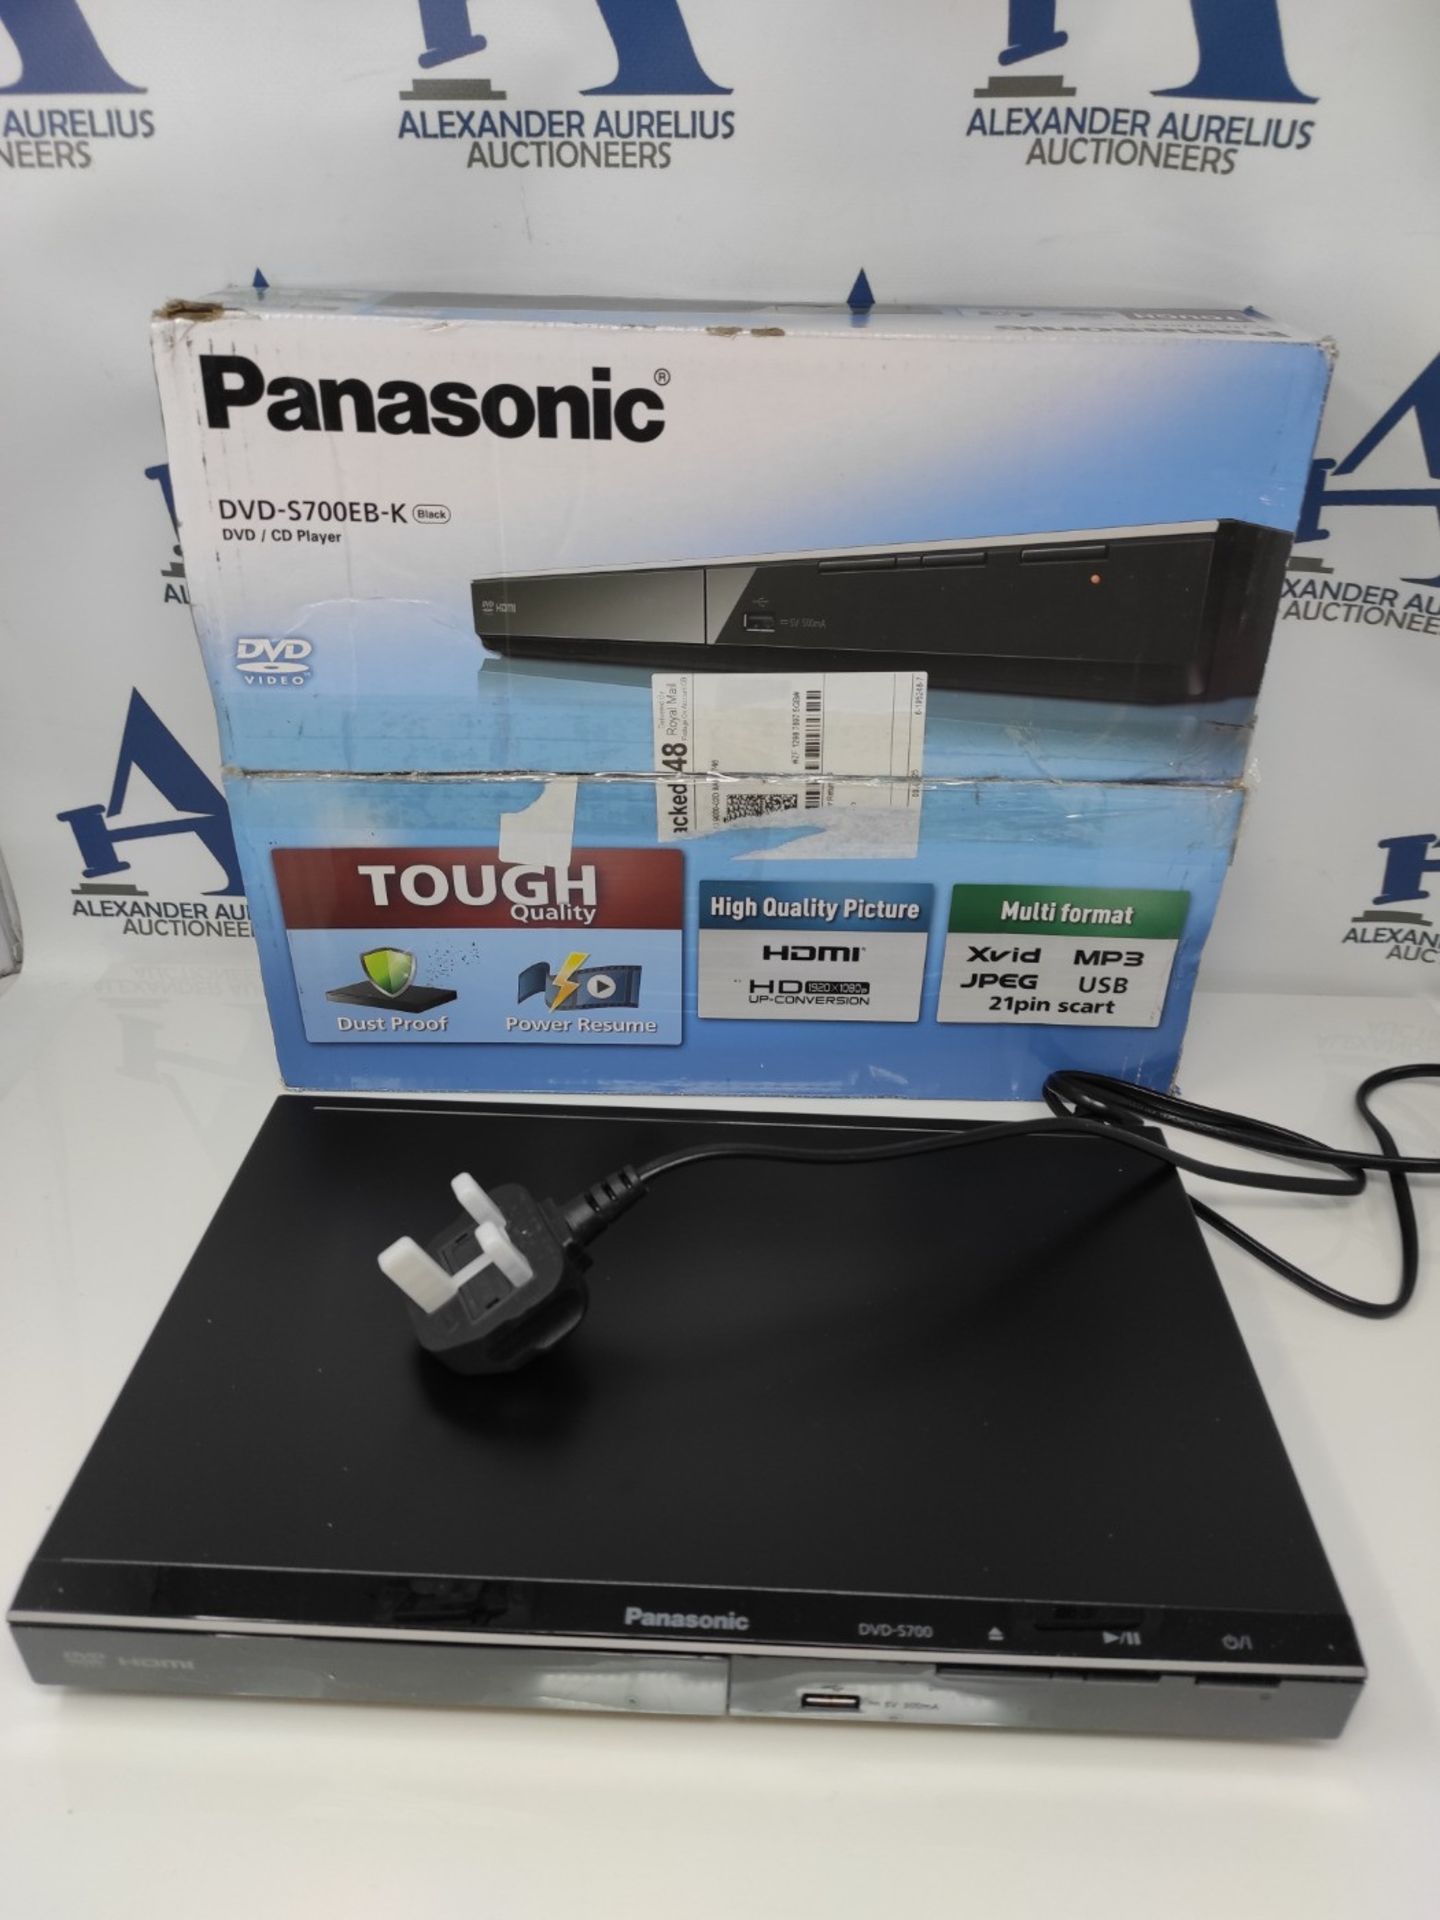 Panasonic DVD-S700EB-K DVD Player with Multi Format Playback - Image 2 of 2